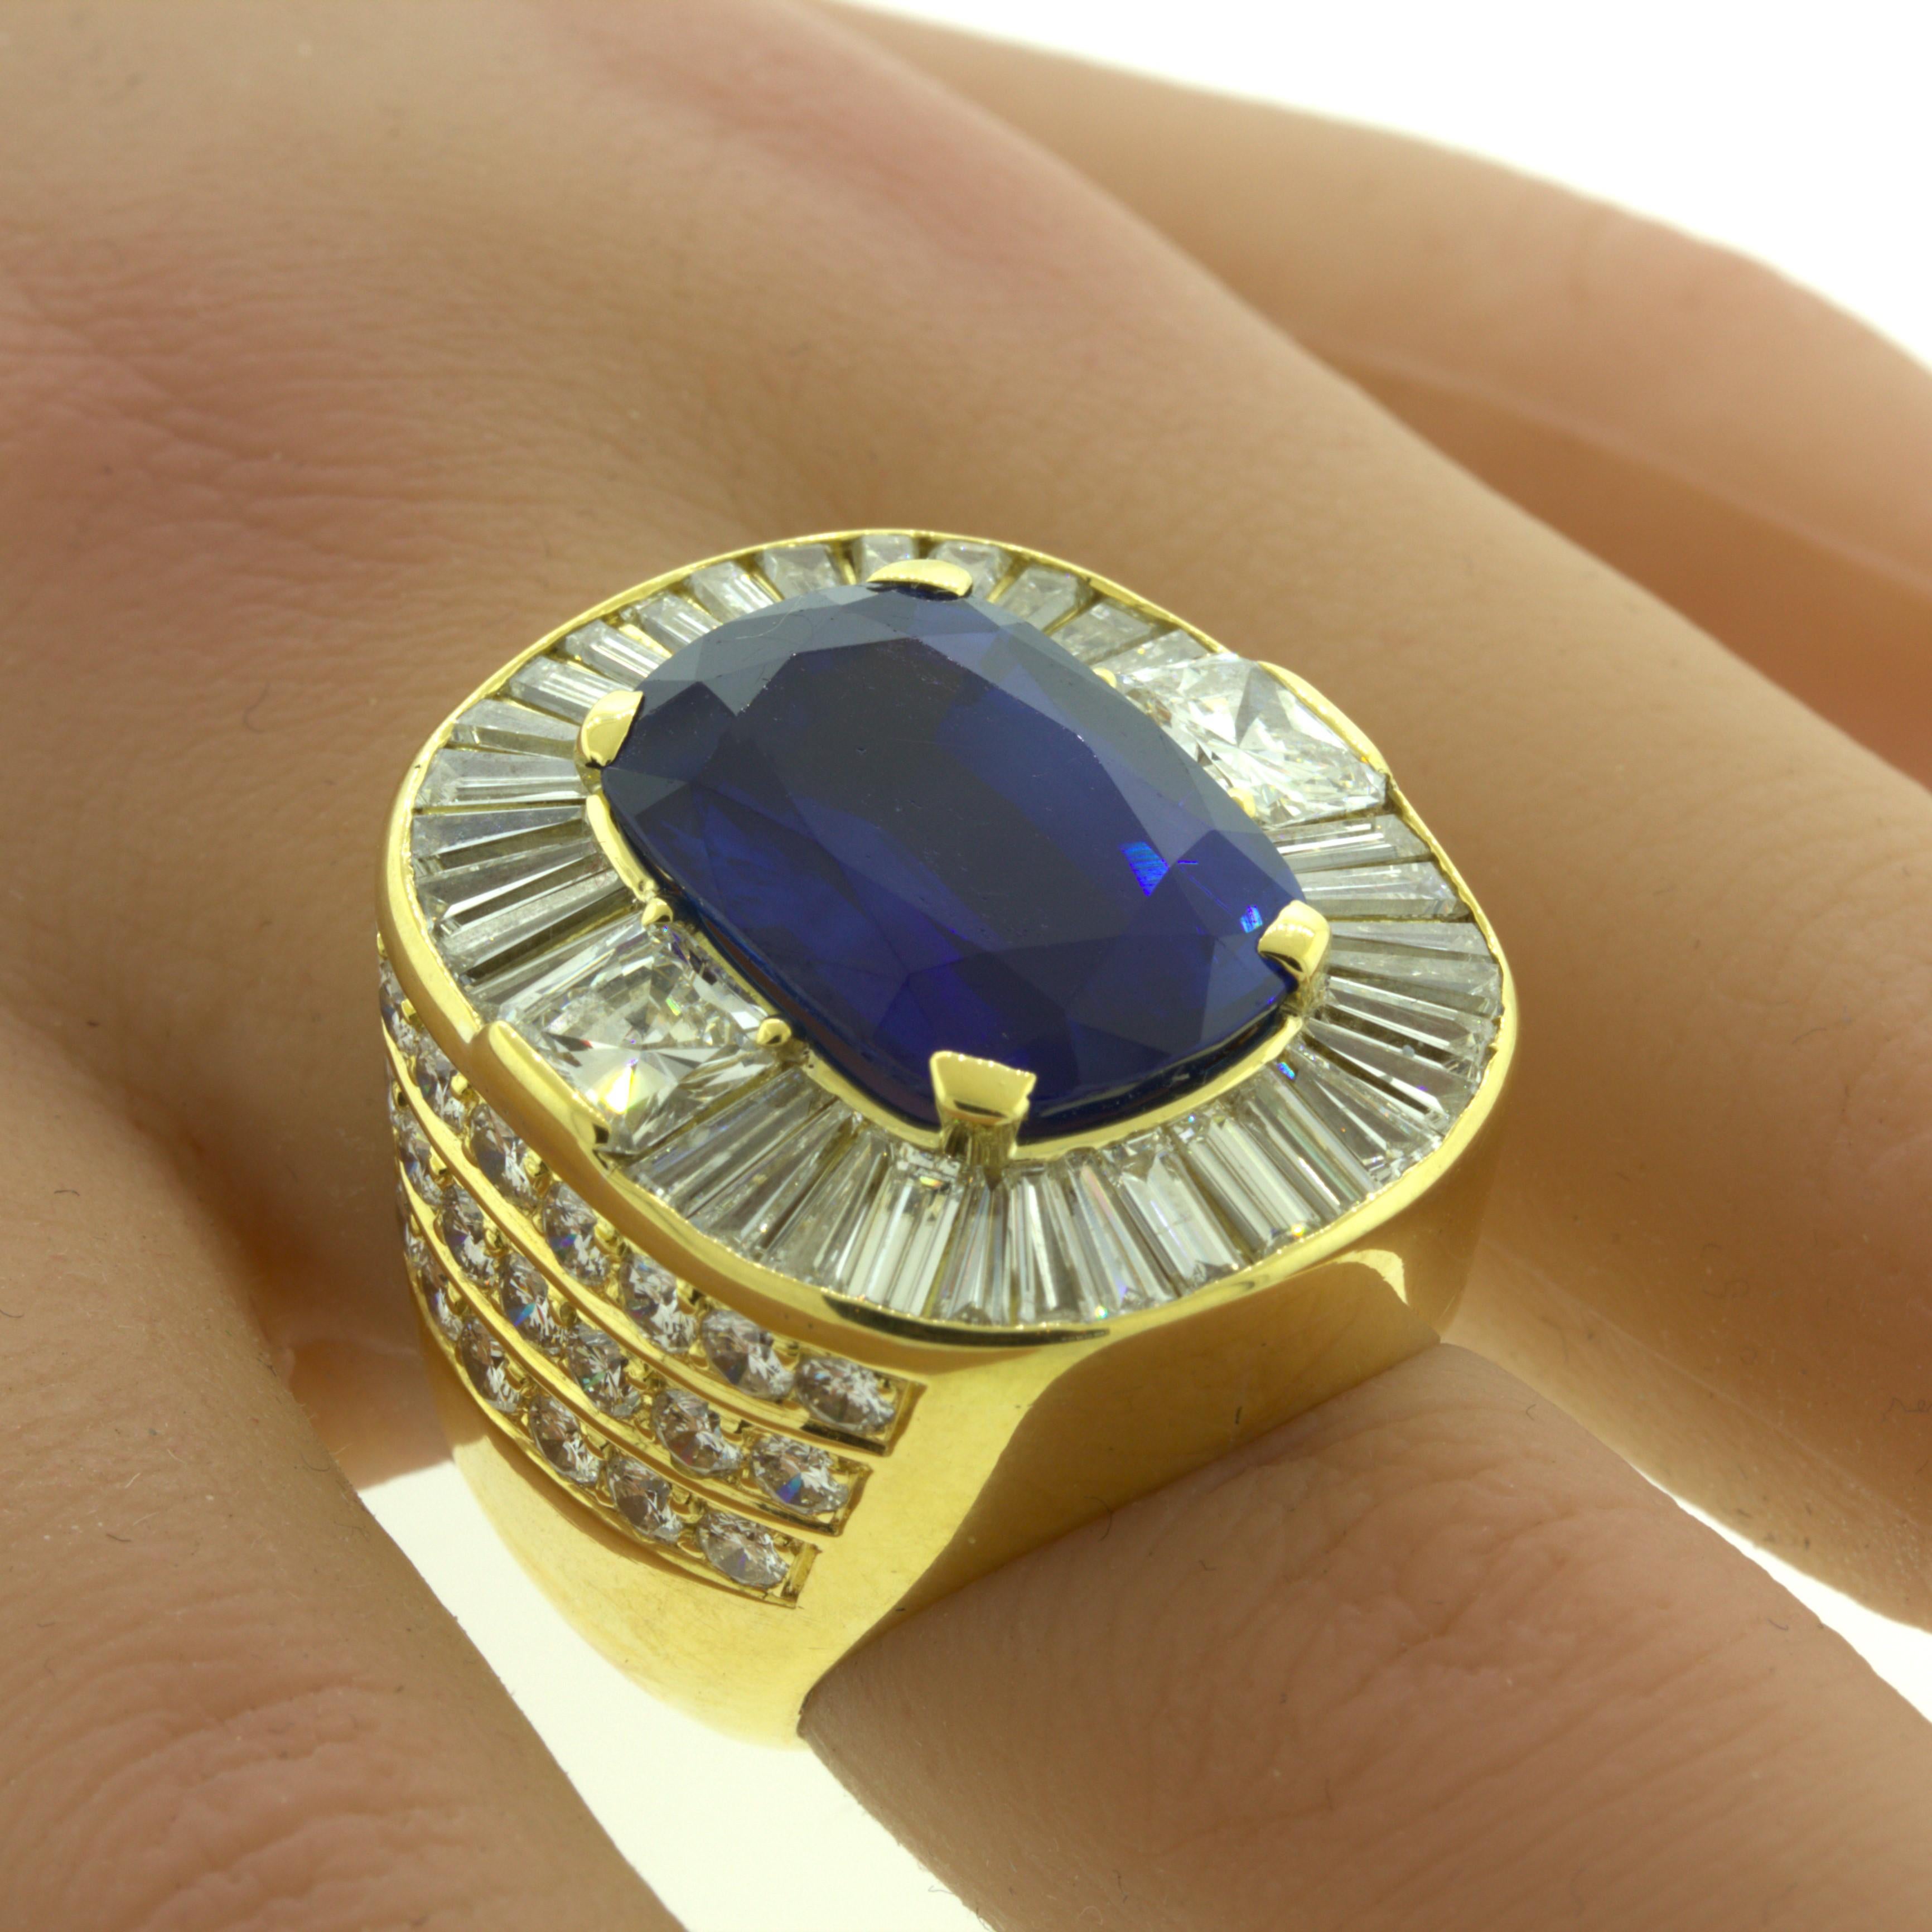 19.36 Carat Ceylon Sapphire Diamond 18K Yellow Gold Cocktail Ring, GIA Certified For Sale 2